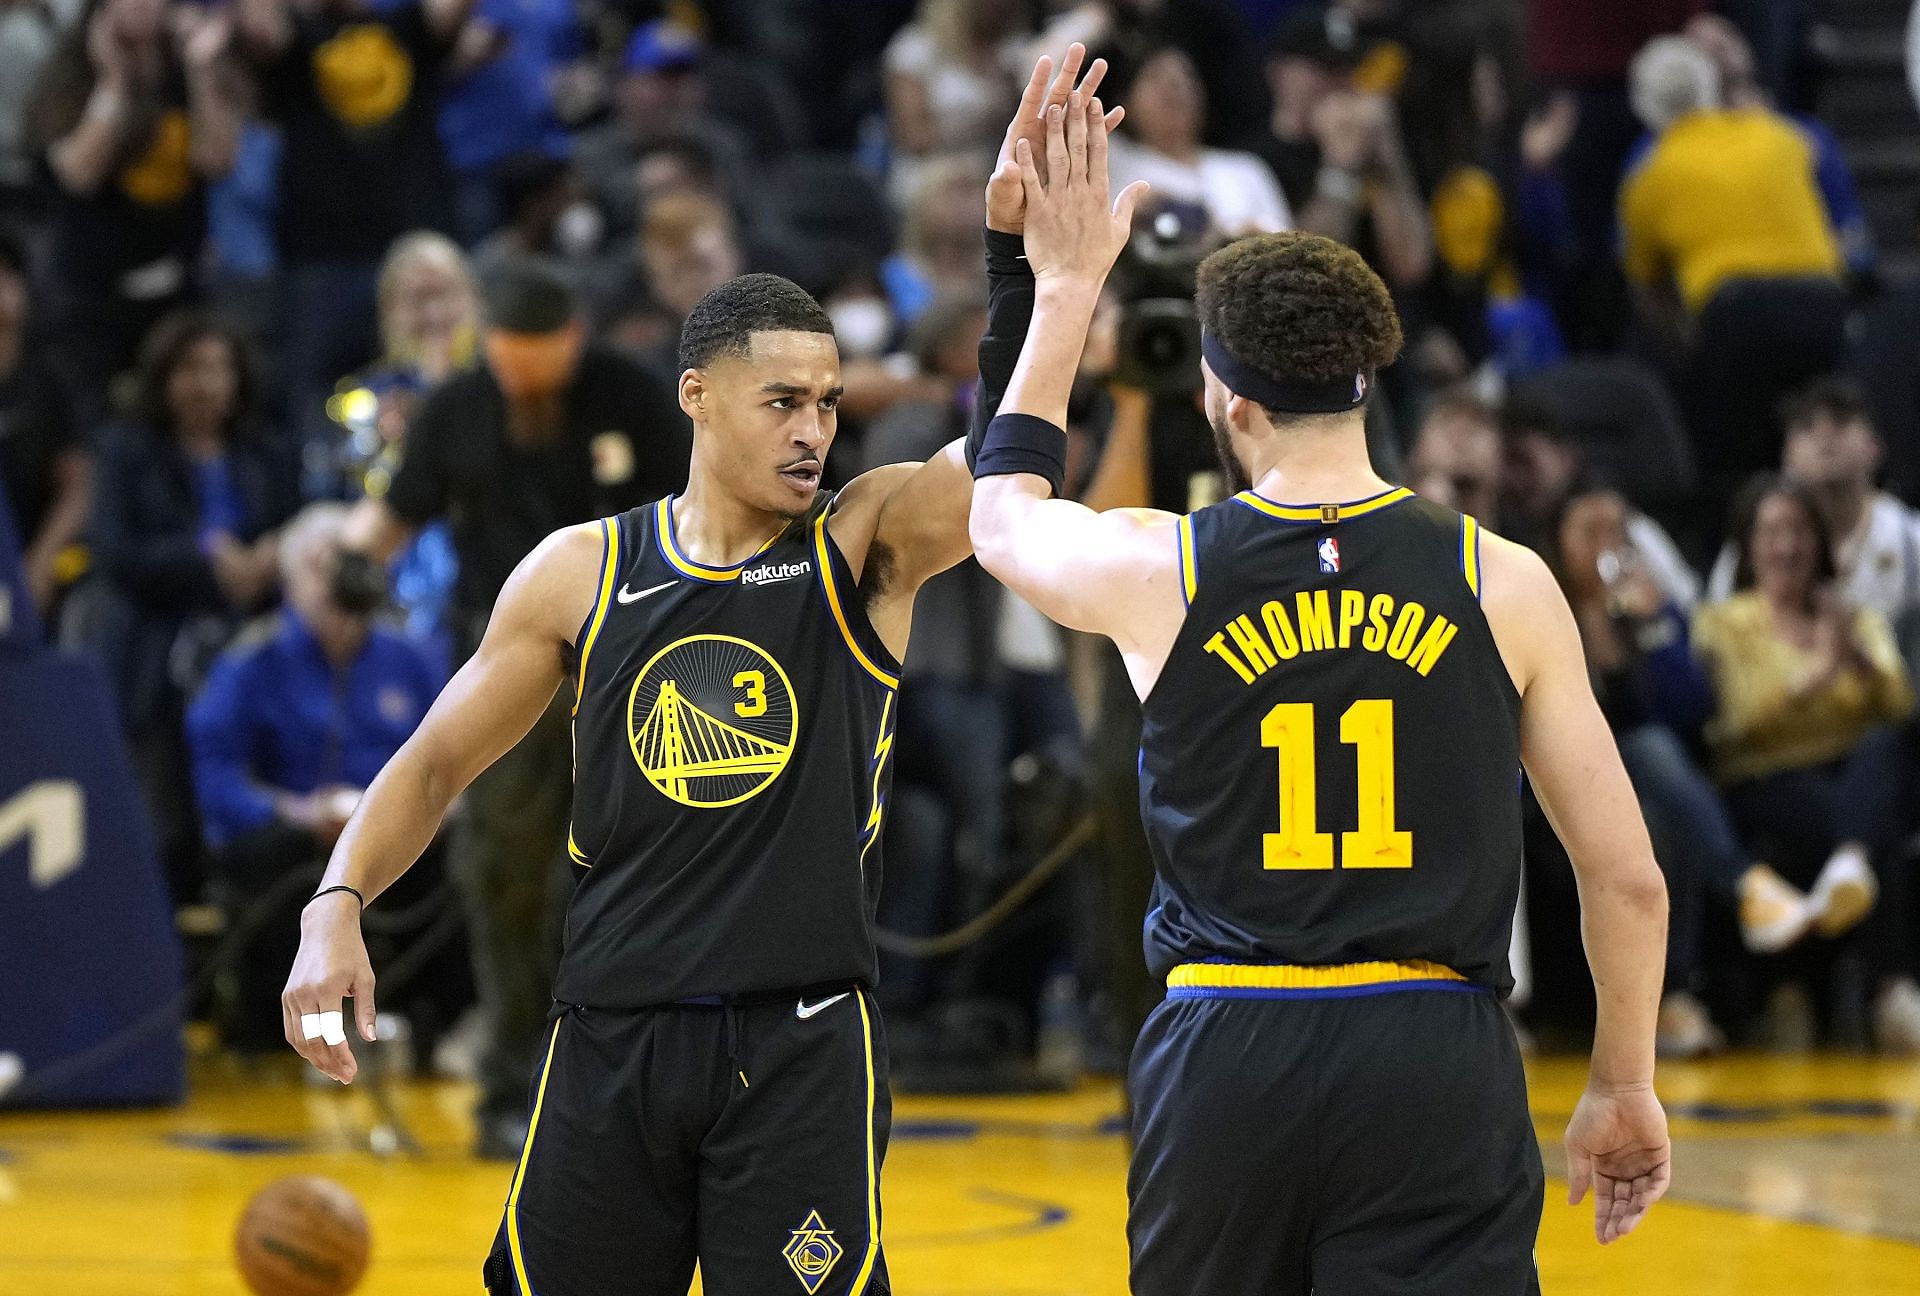 Jordan Poole and Klay Thompson combined for 48 points on 19-of-30 shooting for Golden State Warriors in their Game 3 matchup versus the Memphis Grizzlies